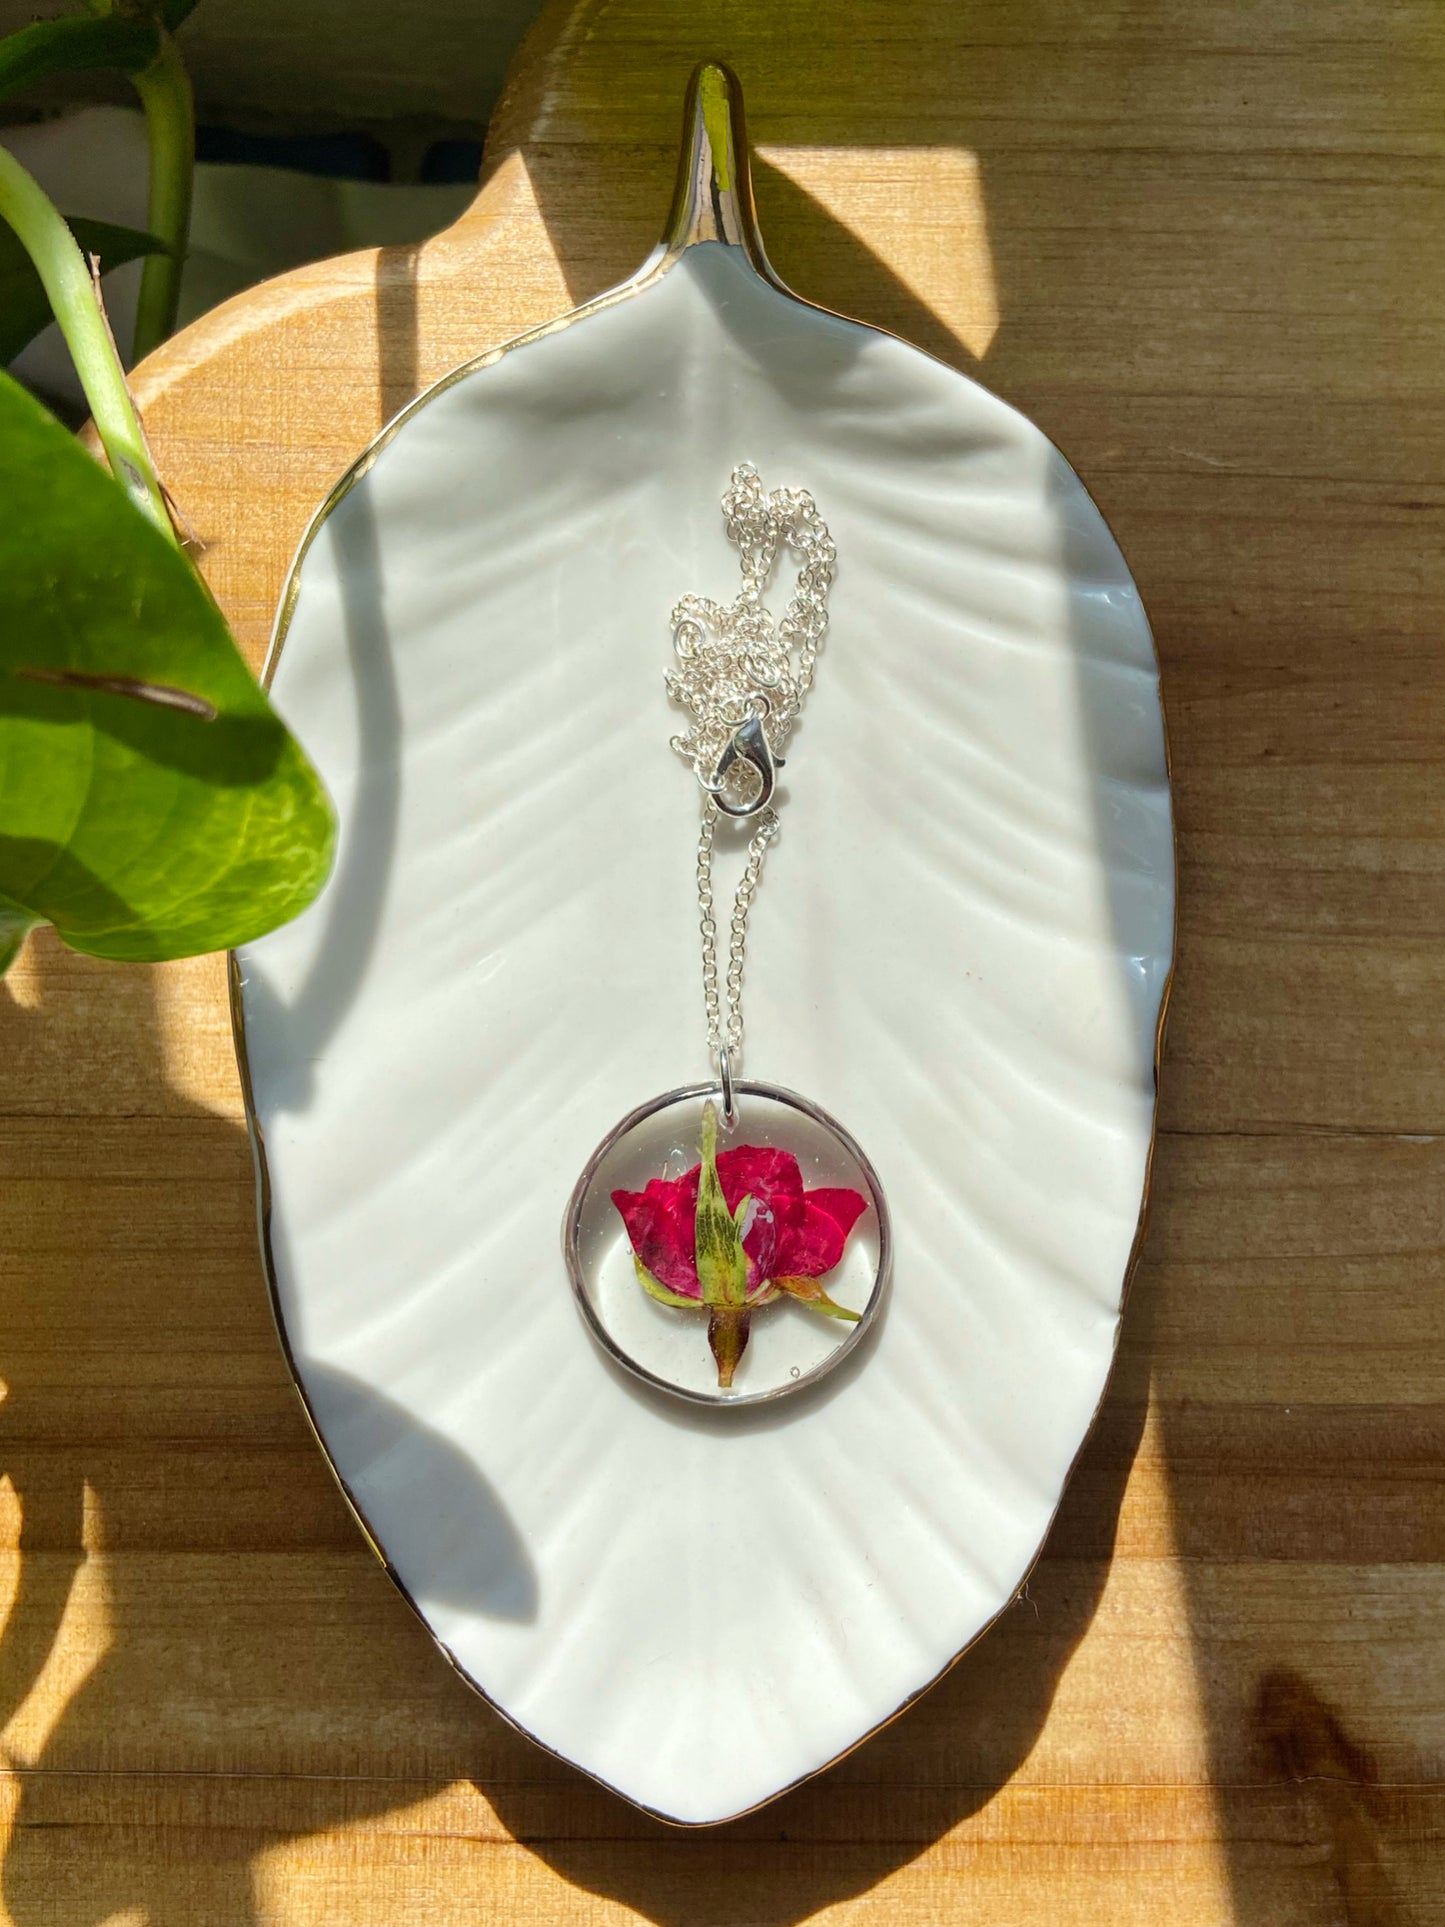 Roses- Pressed red rose bud pendant, silver open circle statement necklace